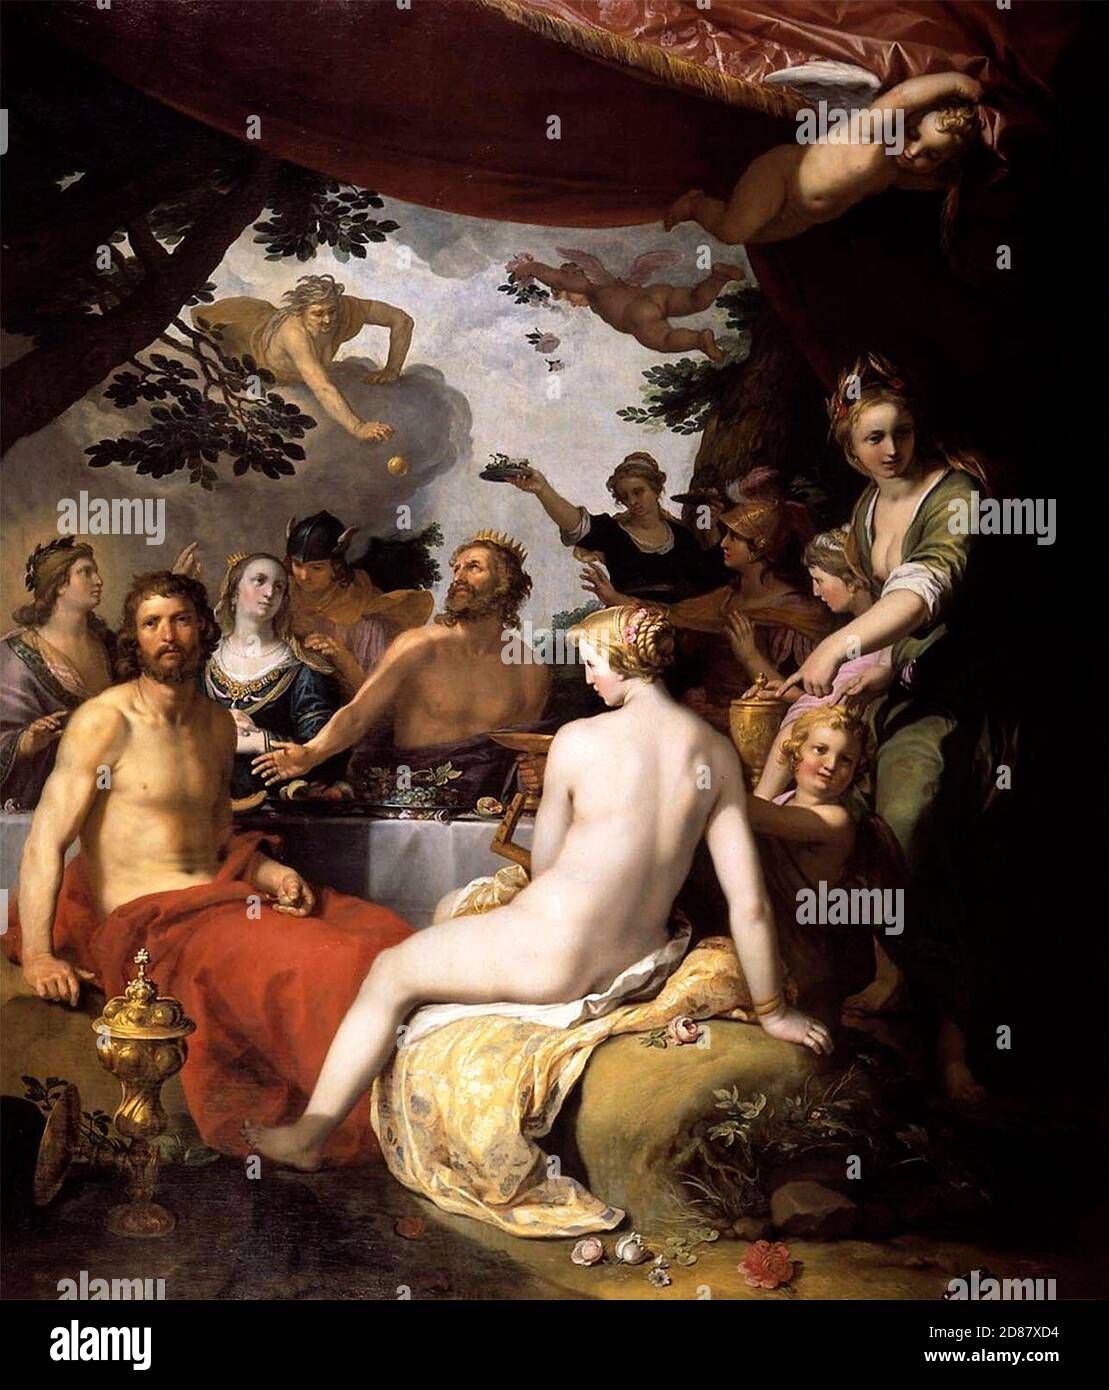 The feast of the gods at the wedding of Peleus and Thetis - Abraham Bloemaert, 1638 Stock Photo